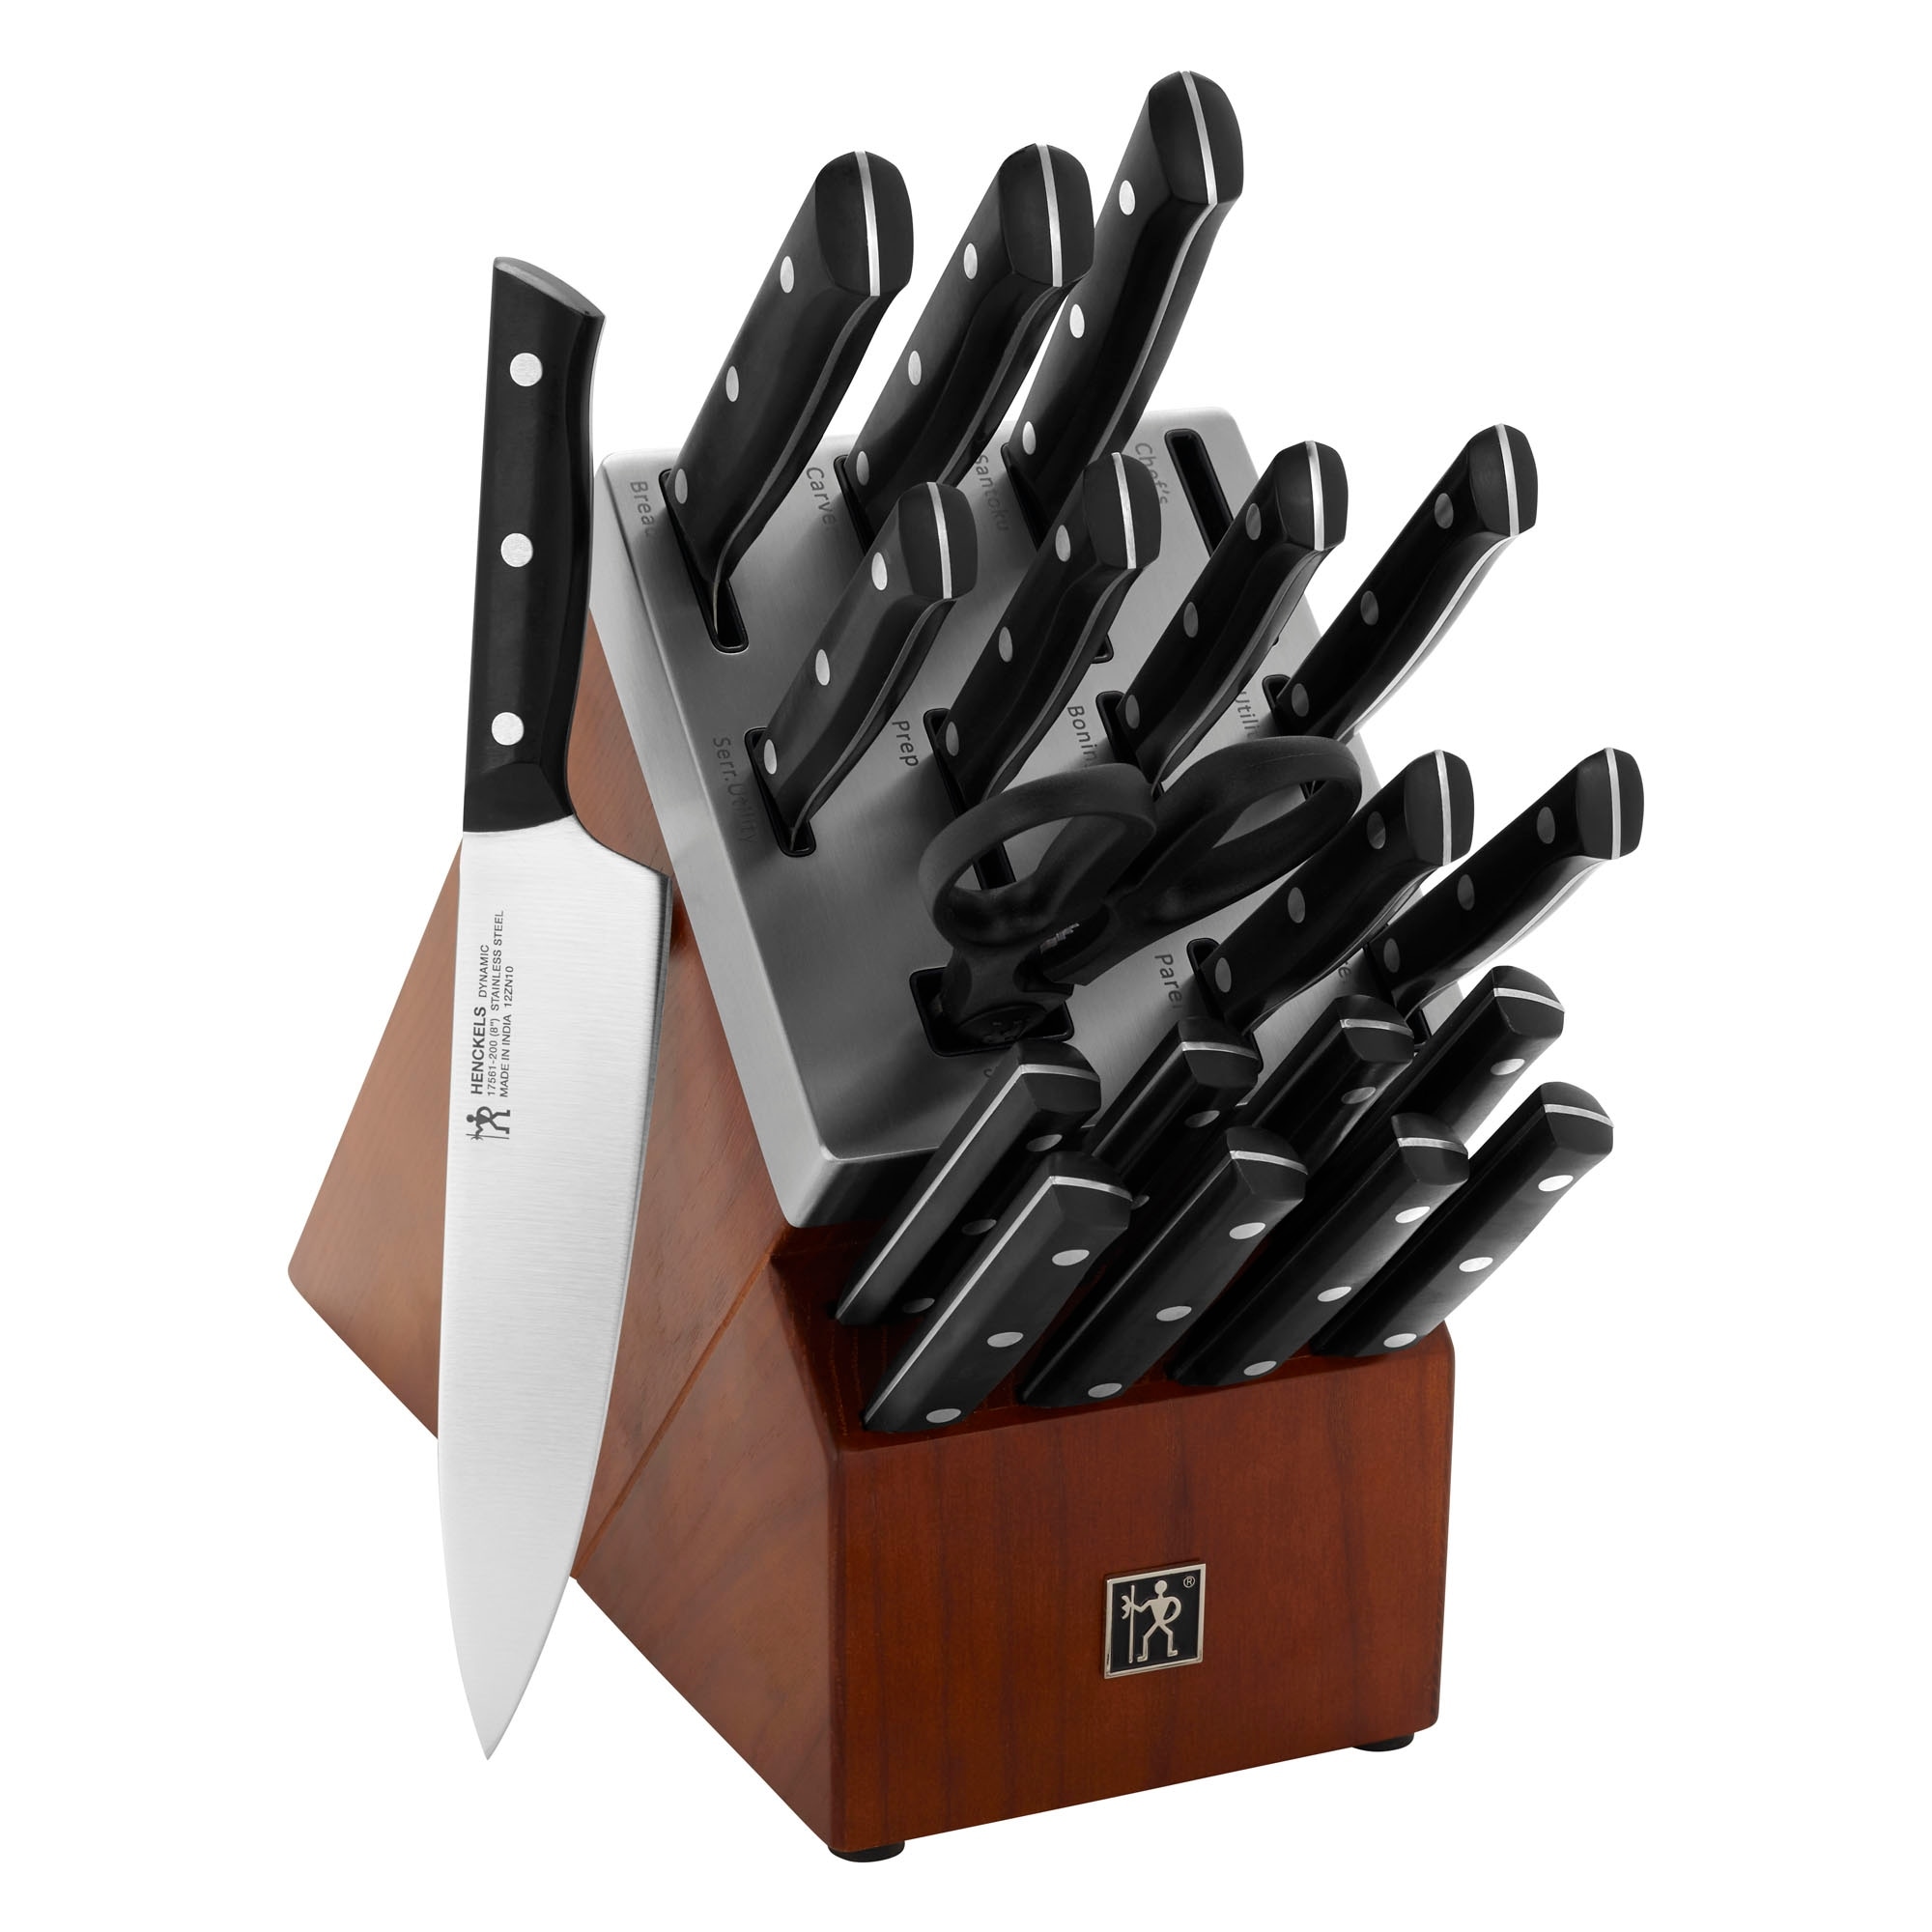 https://ak1.ostkcdn.com/images/products/is/images/direct/7817695445bbbf4dae2bd1a295a2bee1063393f7/HENCKELS-Dynamic-Self-Sharpening-Knife-Block-Set.jpg